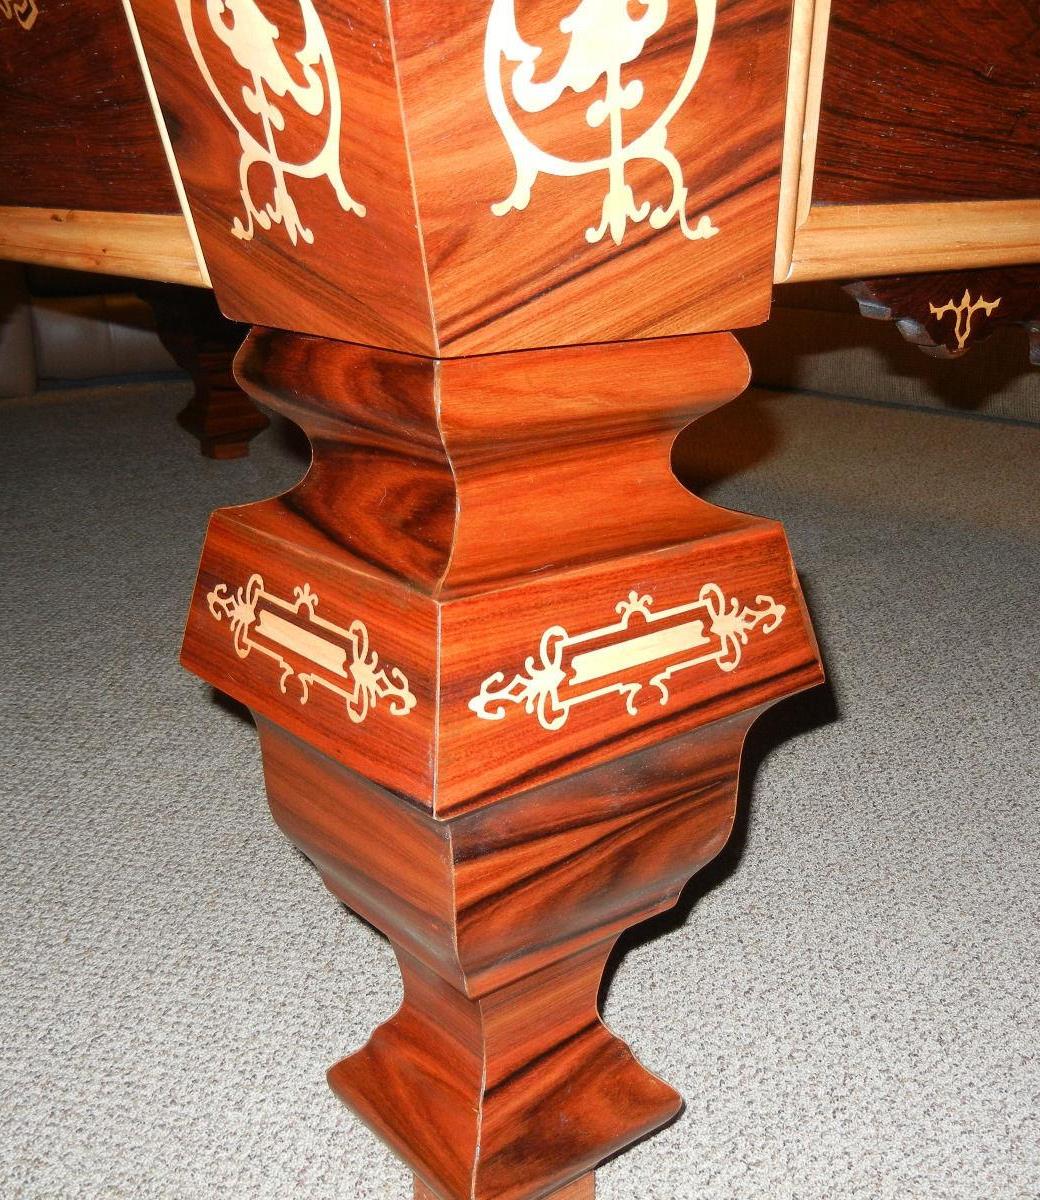 Example of a restored Brunswick pool table from the 1980s with intricate inlay work